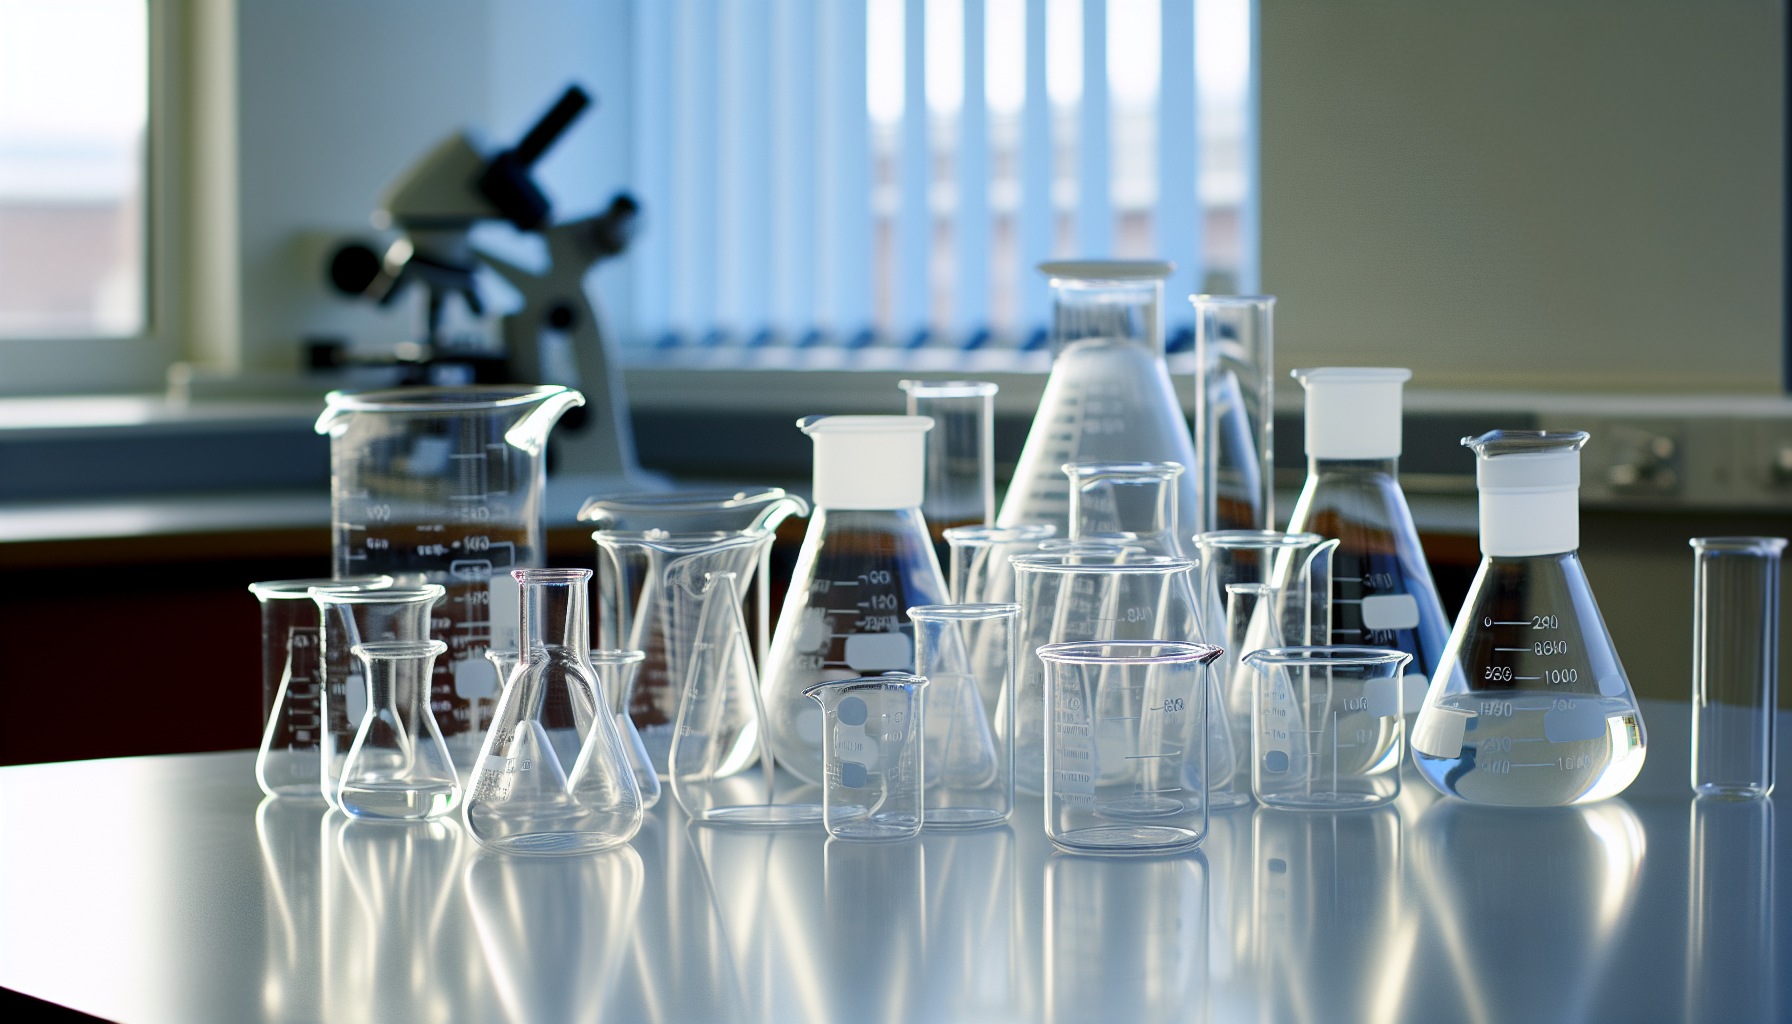 Various glass and plastic beakers on laboratory table